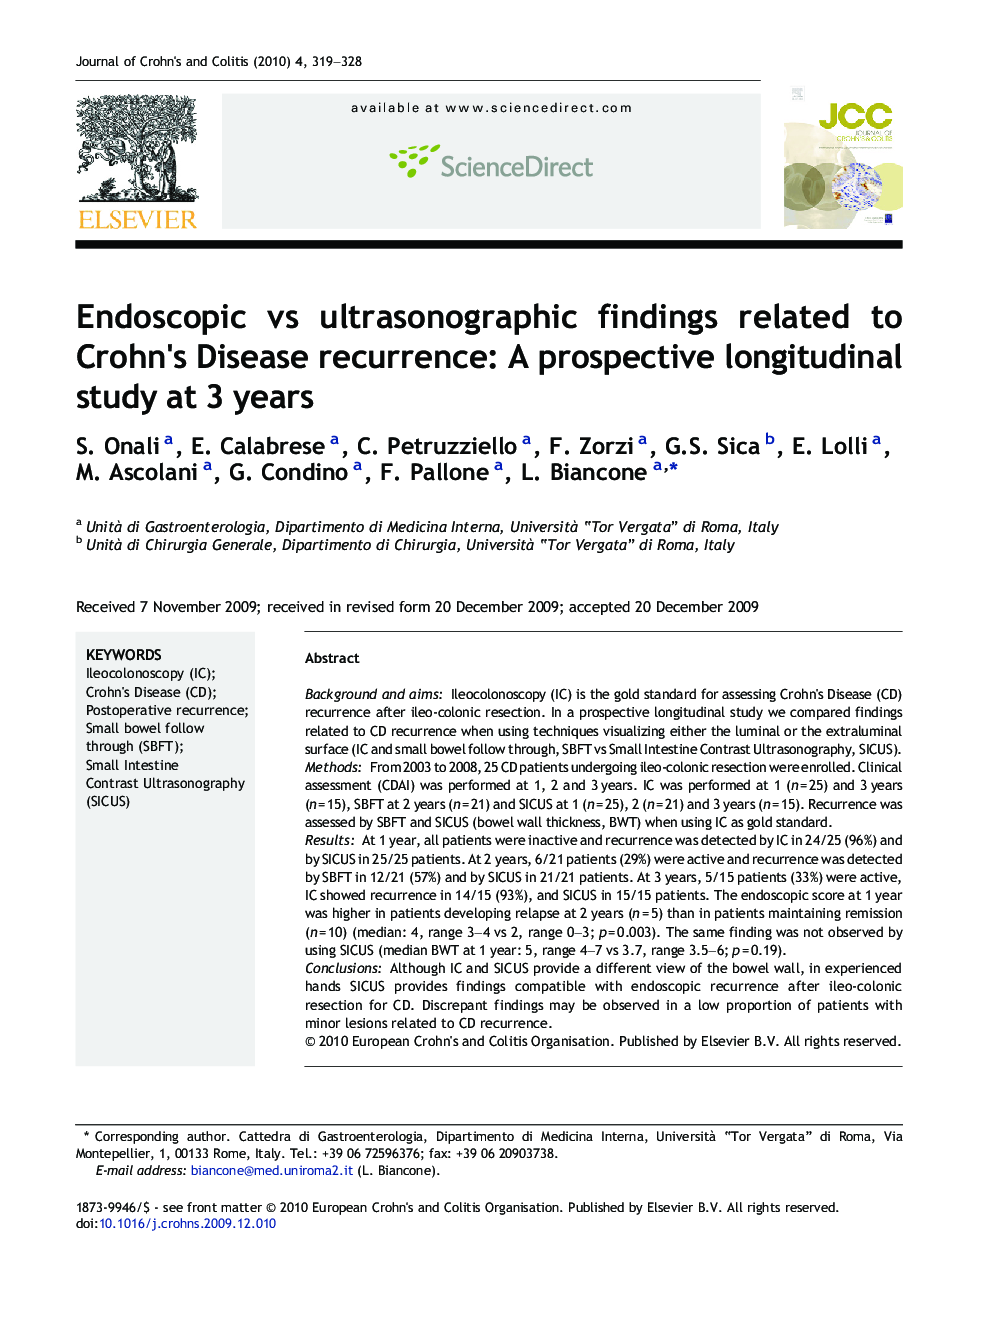 Endoscopic vs ultrasonographic findings related to Crohn's Disease recurrence: A prospective longitudinal study at 3Â years